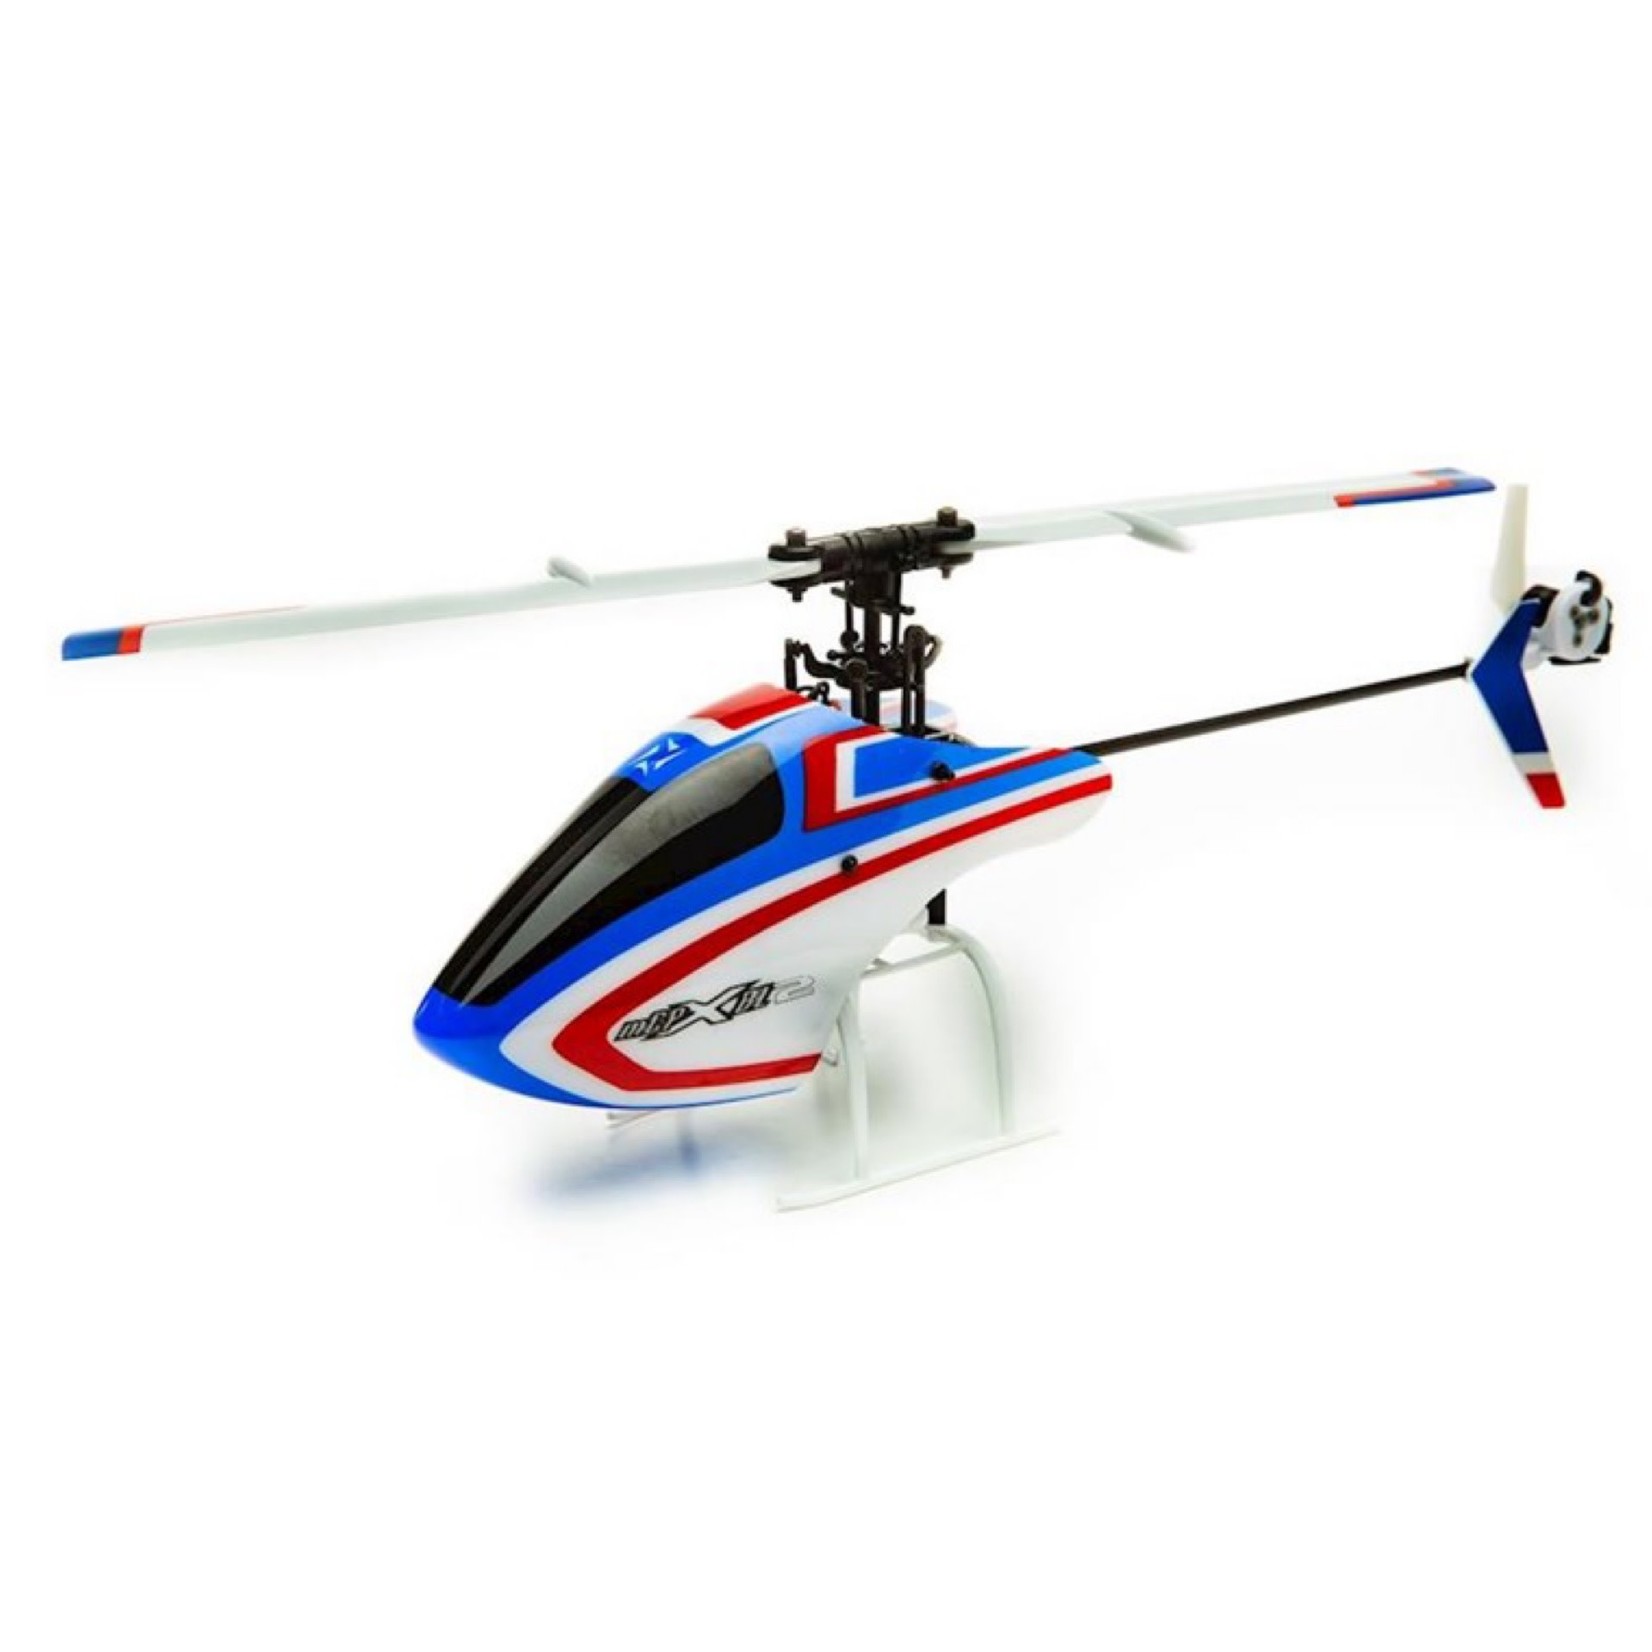 Blade Blade mCP X BL2 BNF Basic Electric Flybarless Helicopter w/SAFE #BLH6050